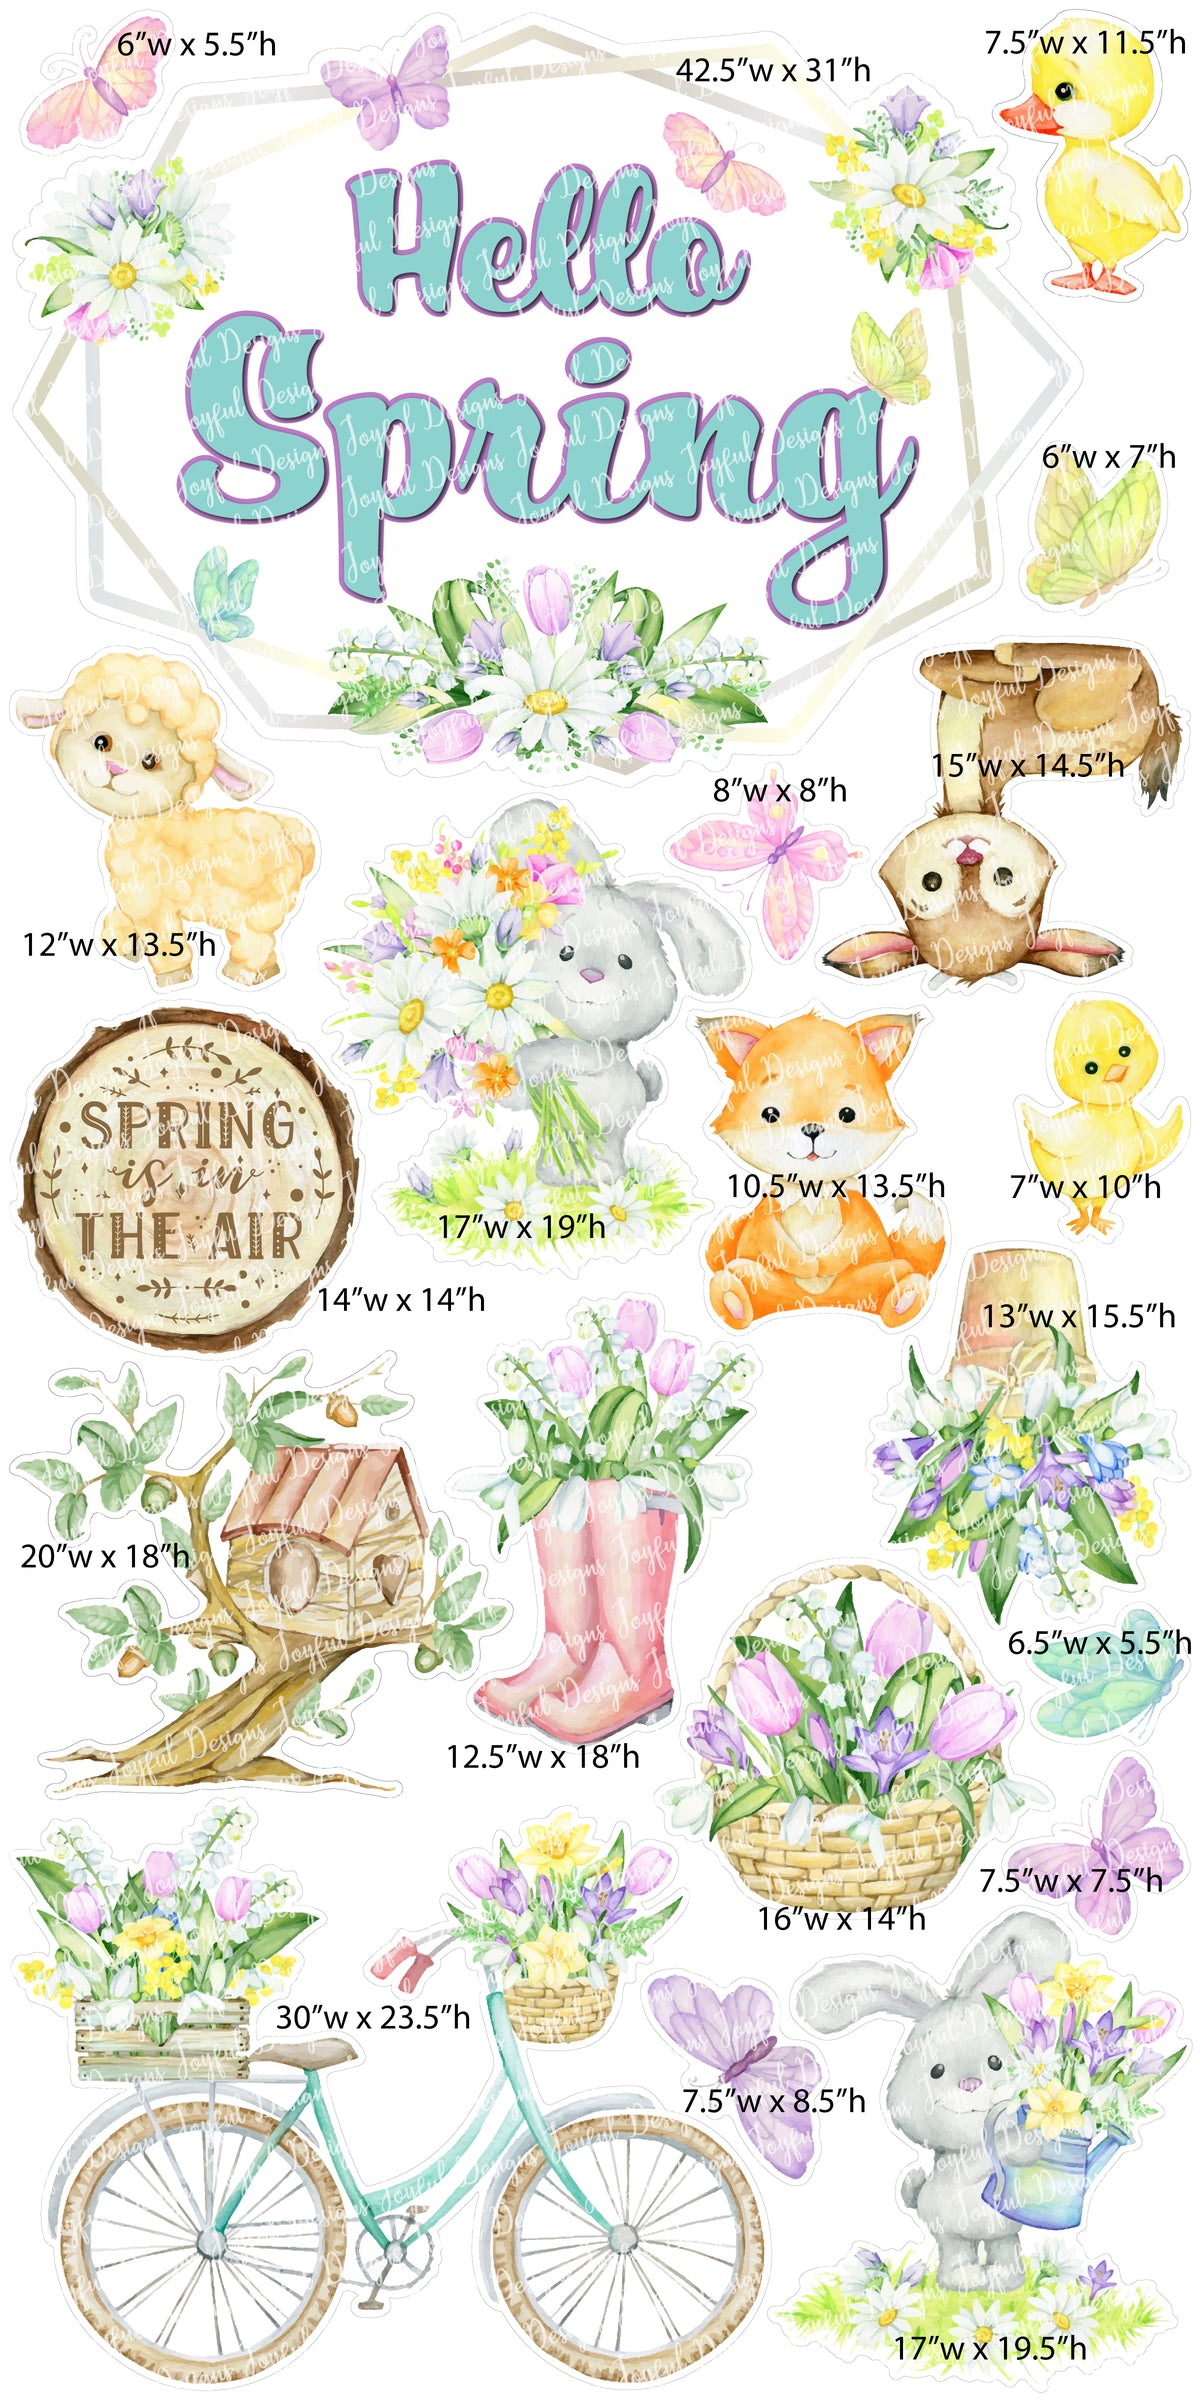 Hello Spring Centerpiece and Flair w Baby Animals